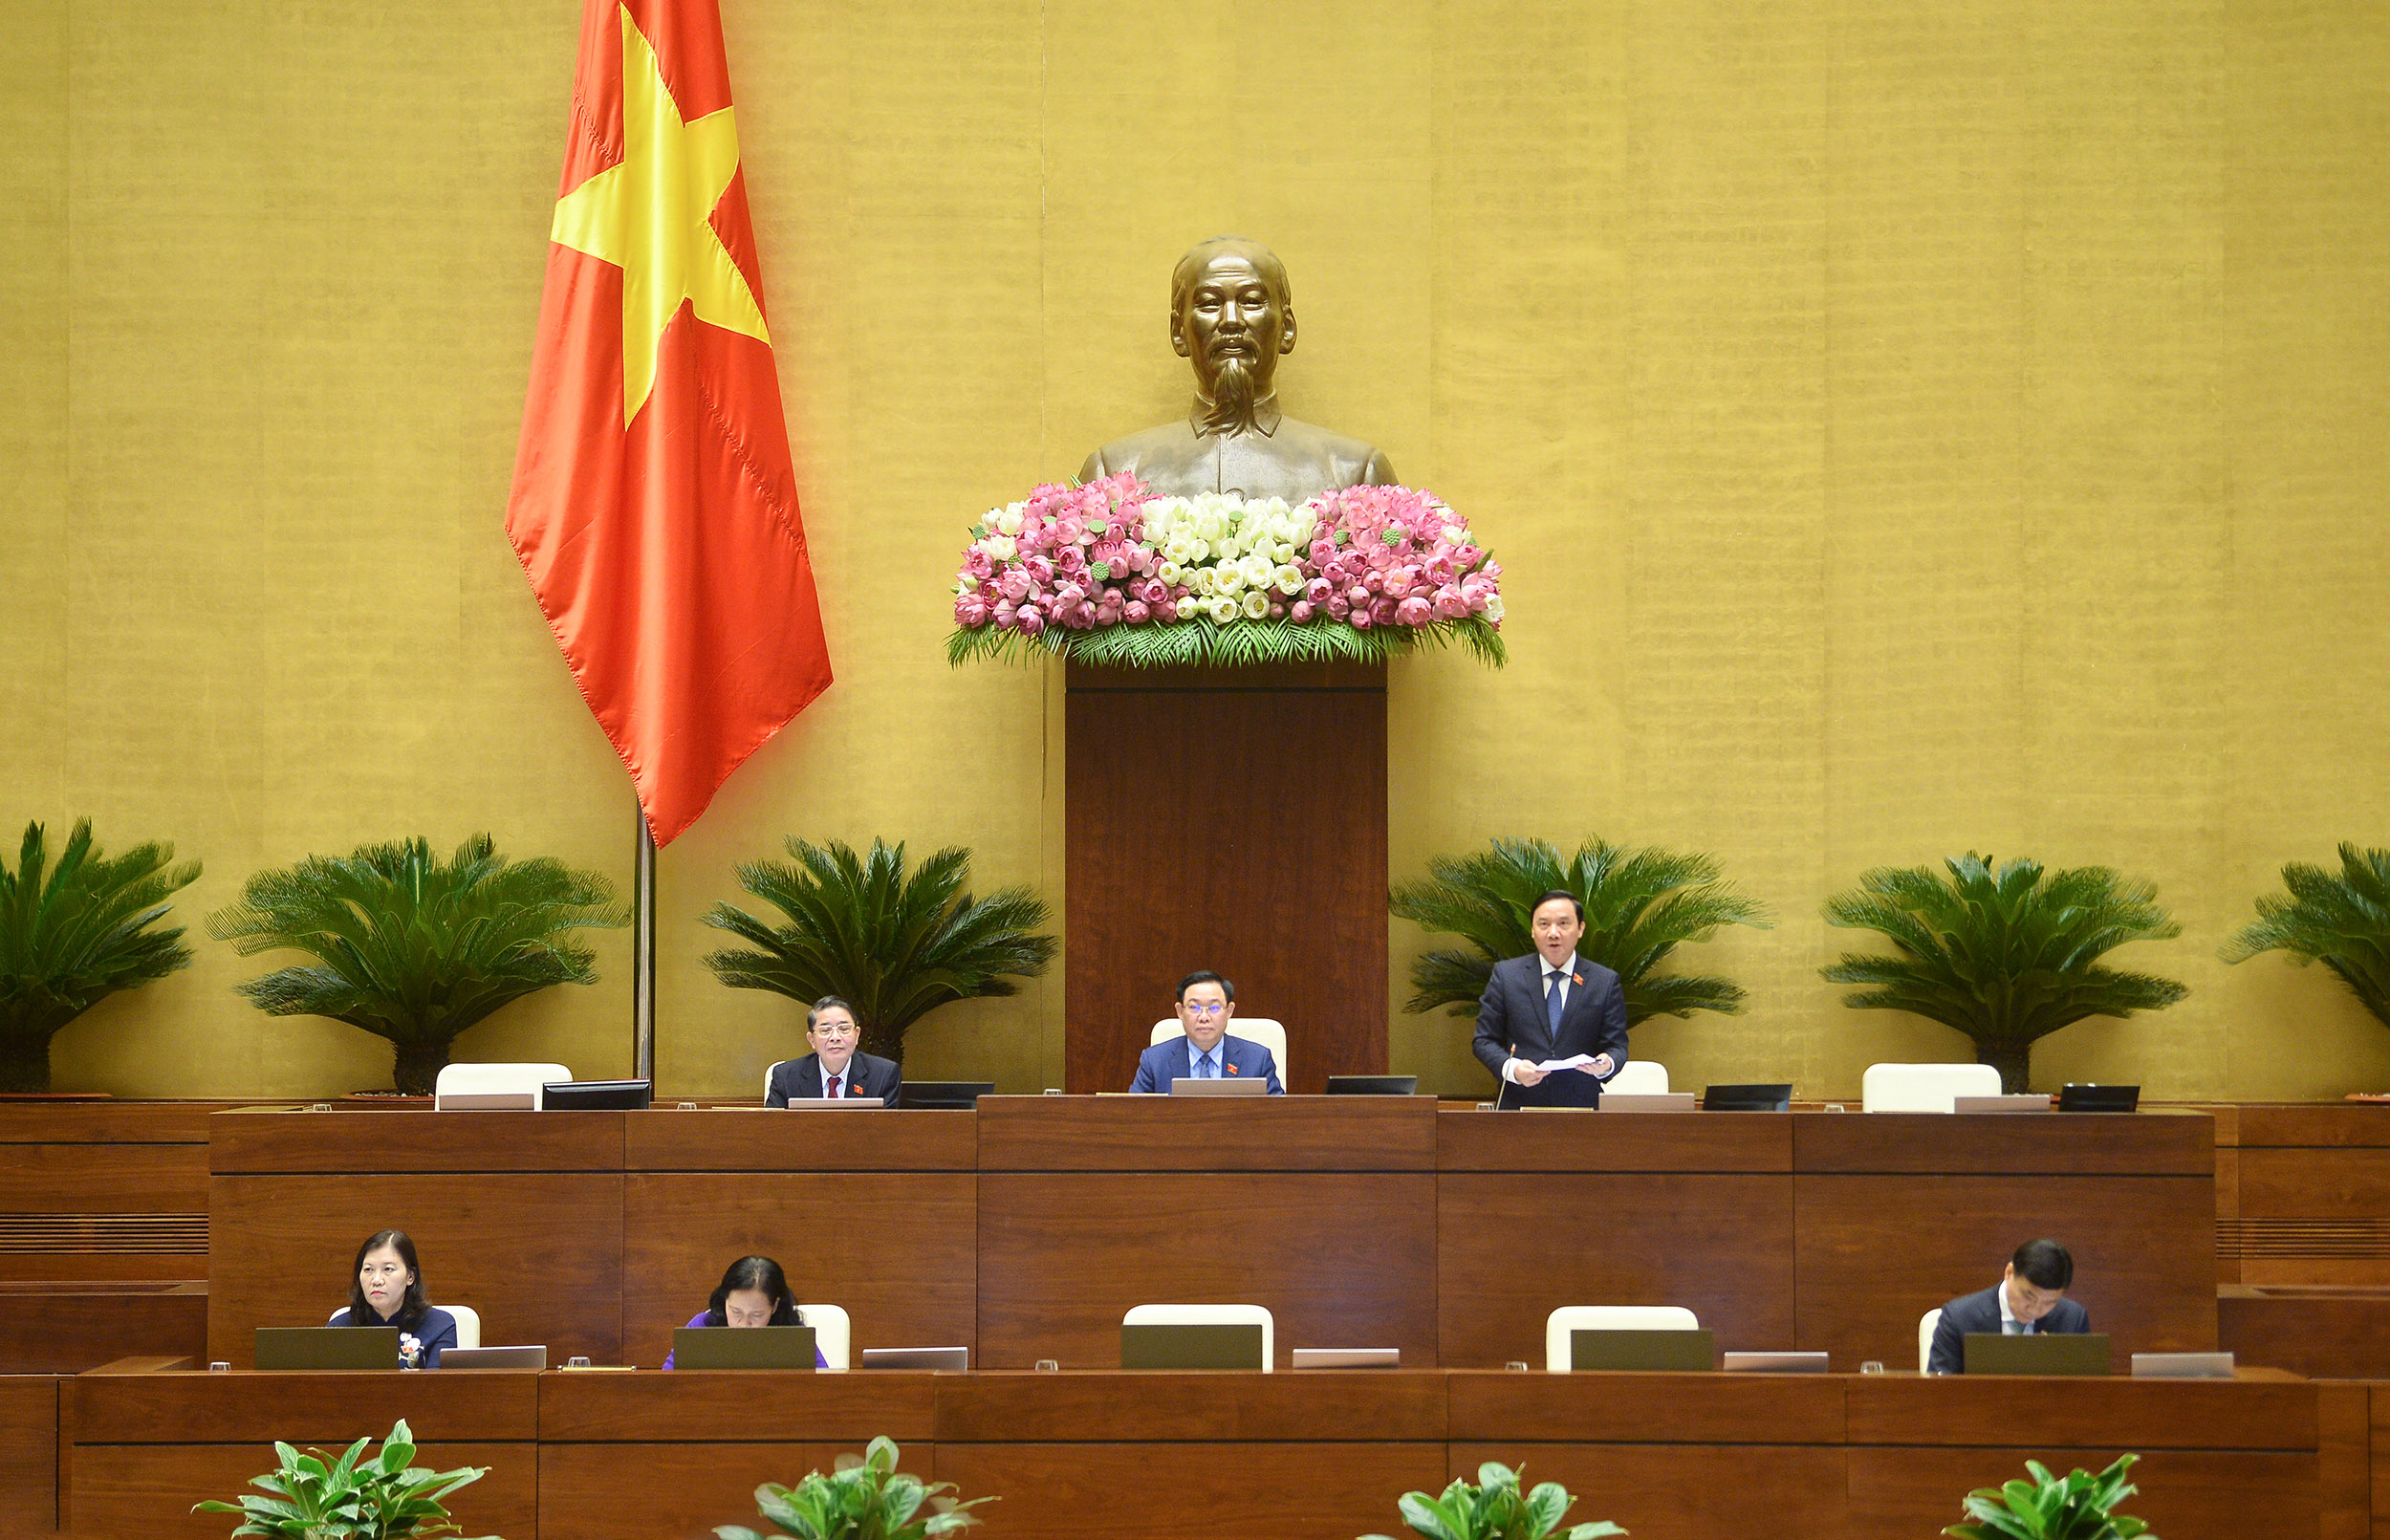 The National Assembly of Vietnam votes for the adoption of the Law on Amendments and Supplements to a number of articles of the Law on Intellectual Property at the rate of 95.58%.